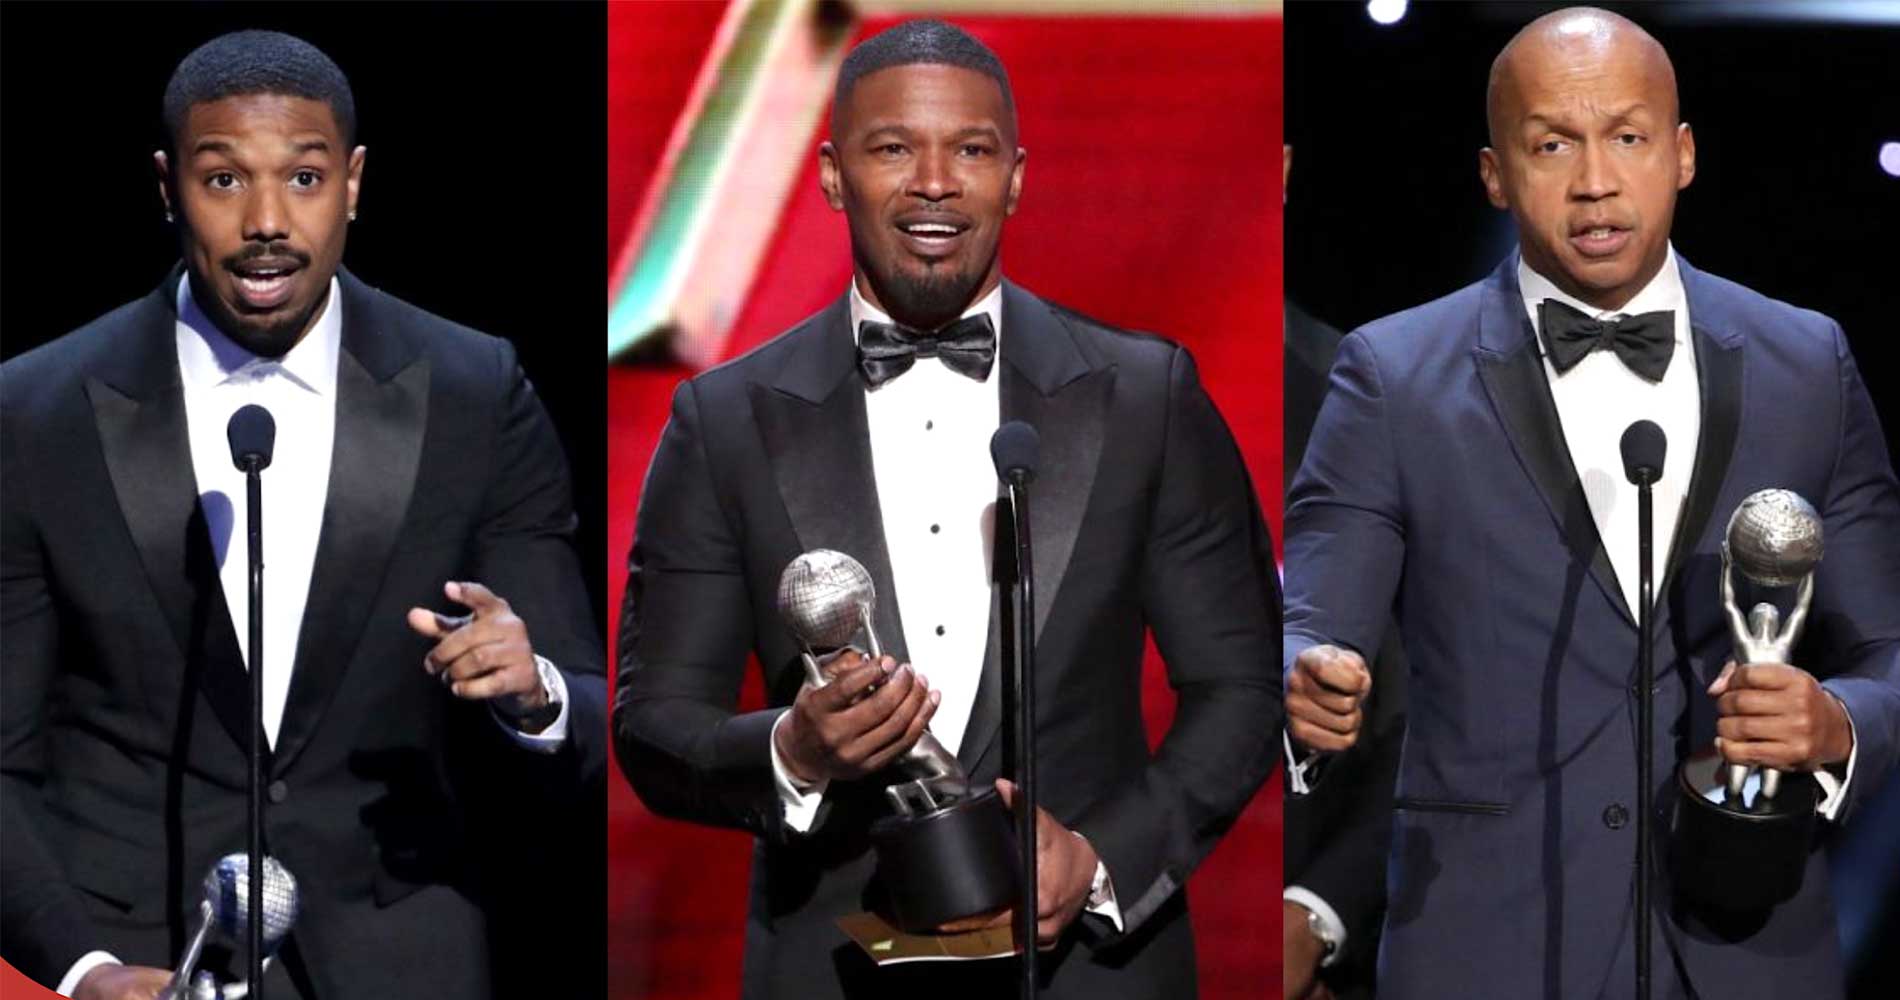 naacp image award for outstanding actor in a motion picture